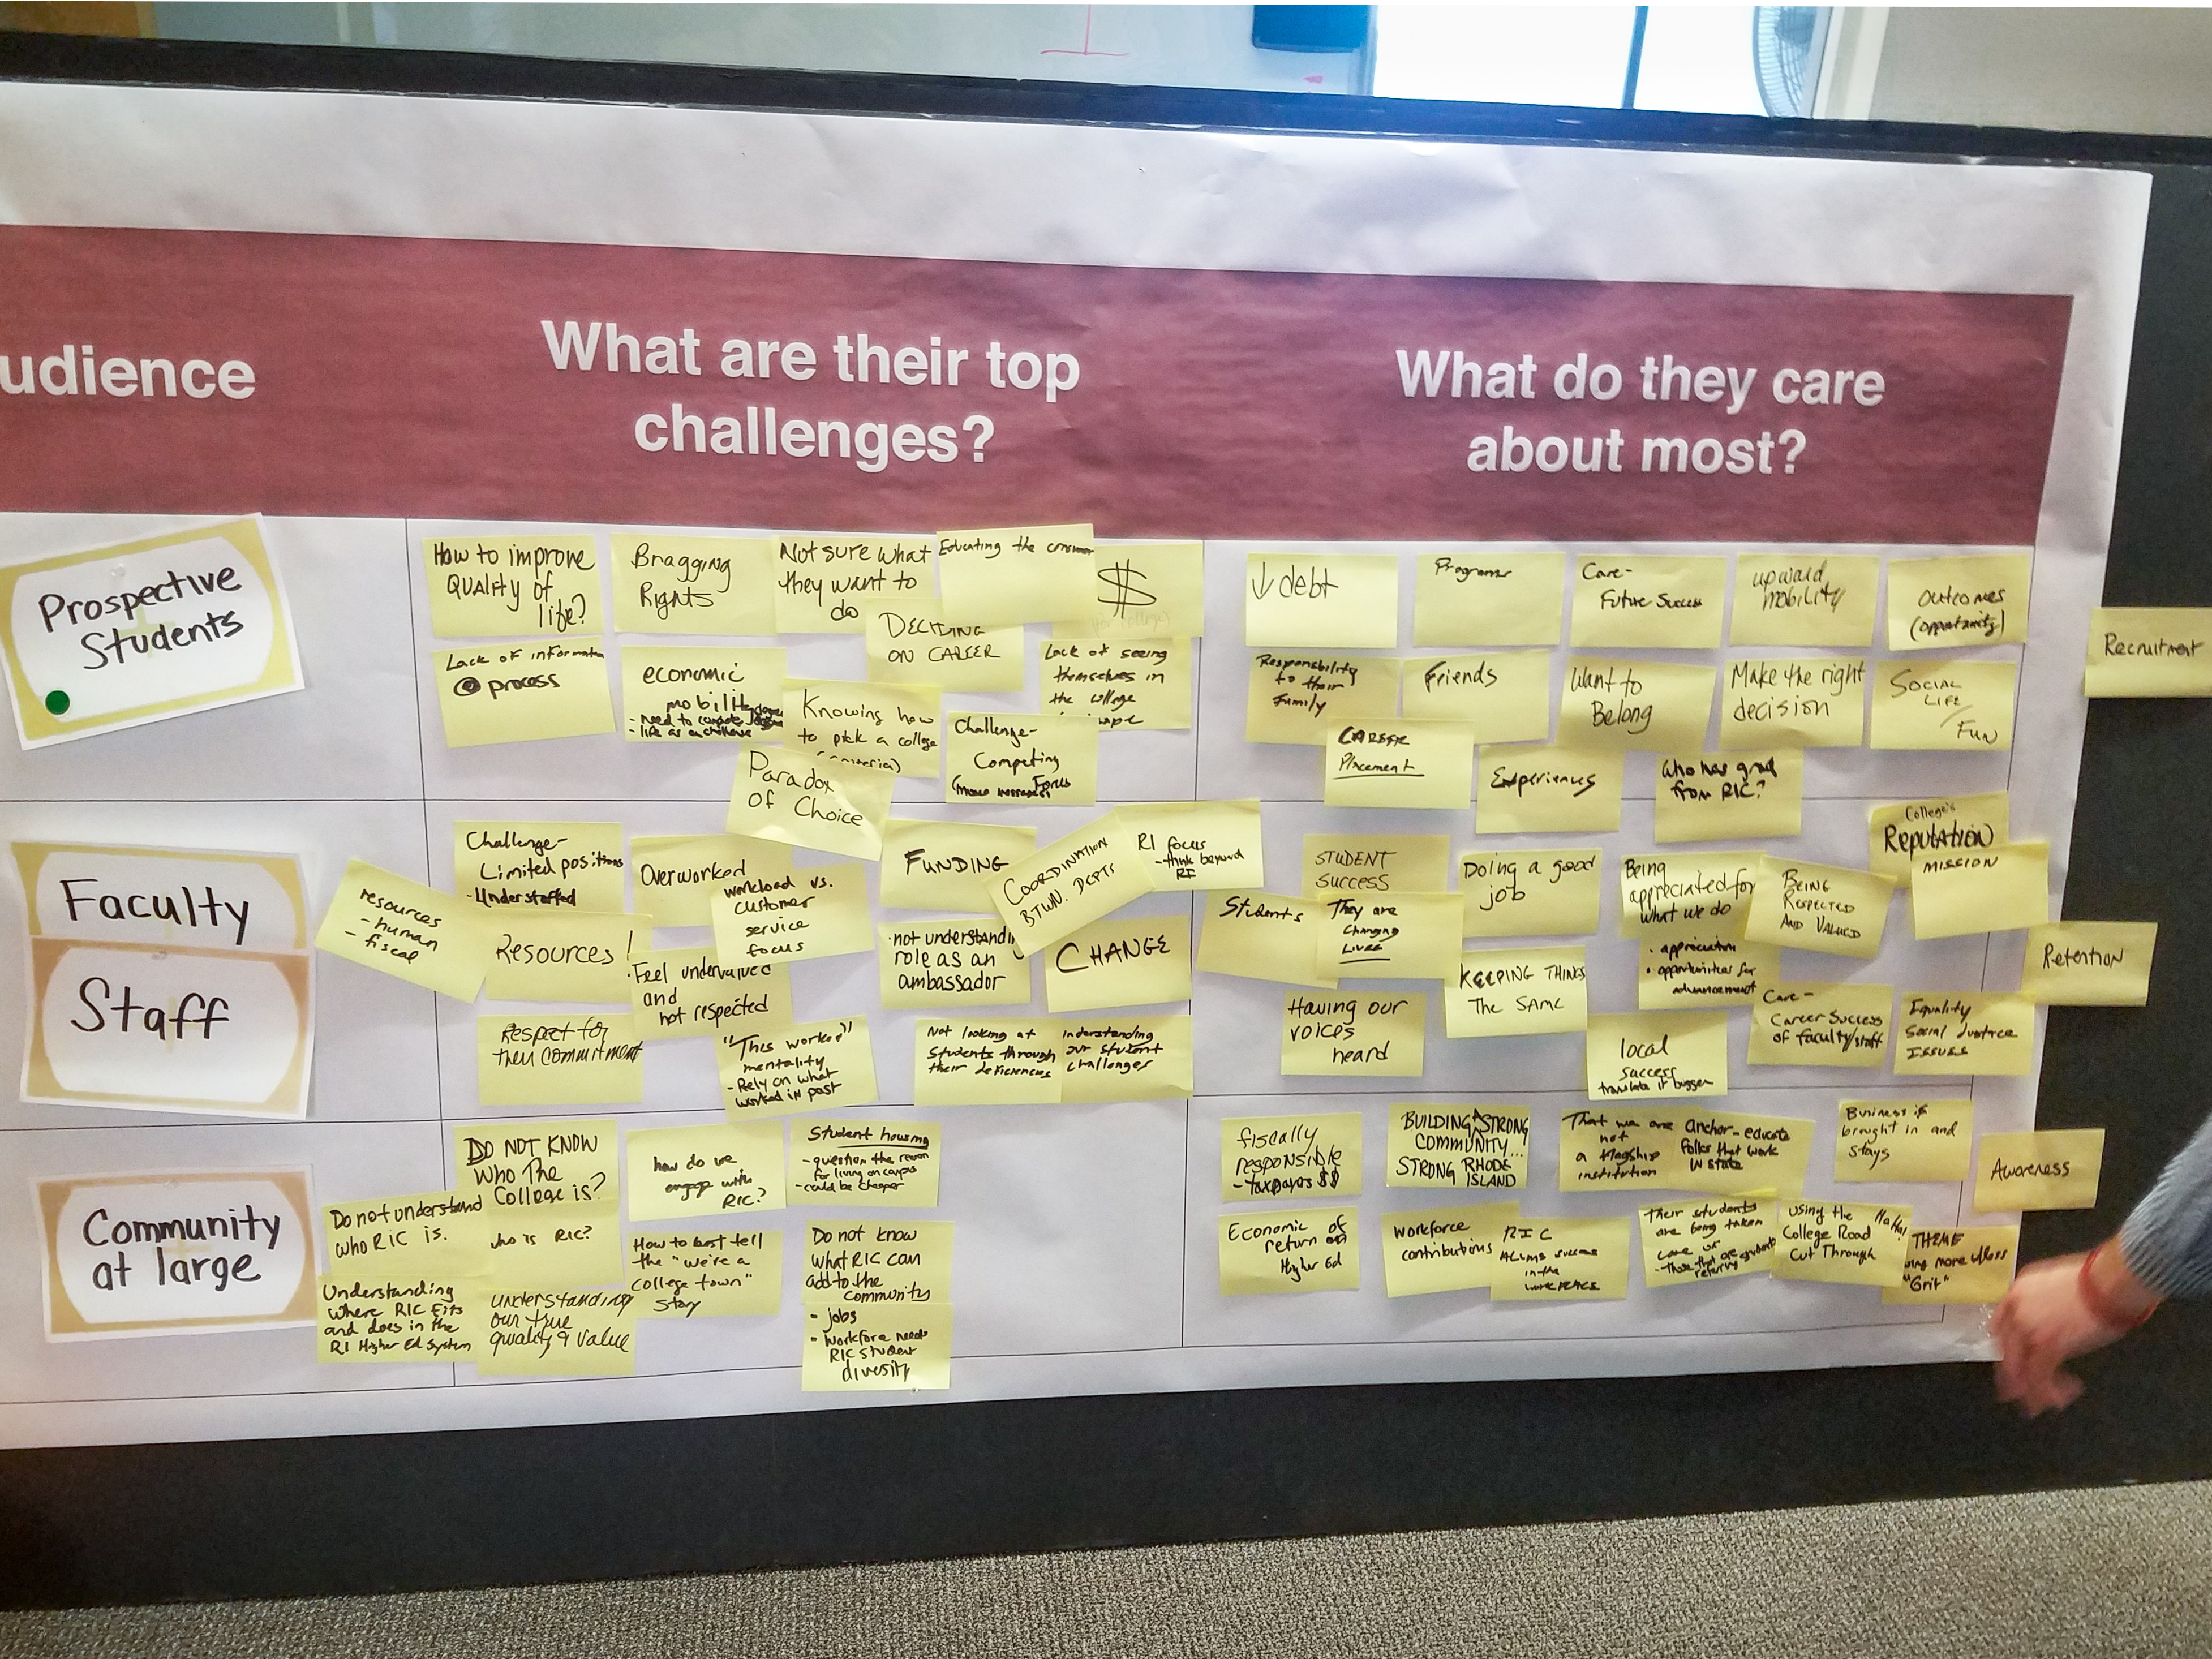 A board with post-it notes organized into the categories of "Audience", "What are their top challenges?", and "What do they care about most?"